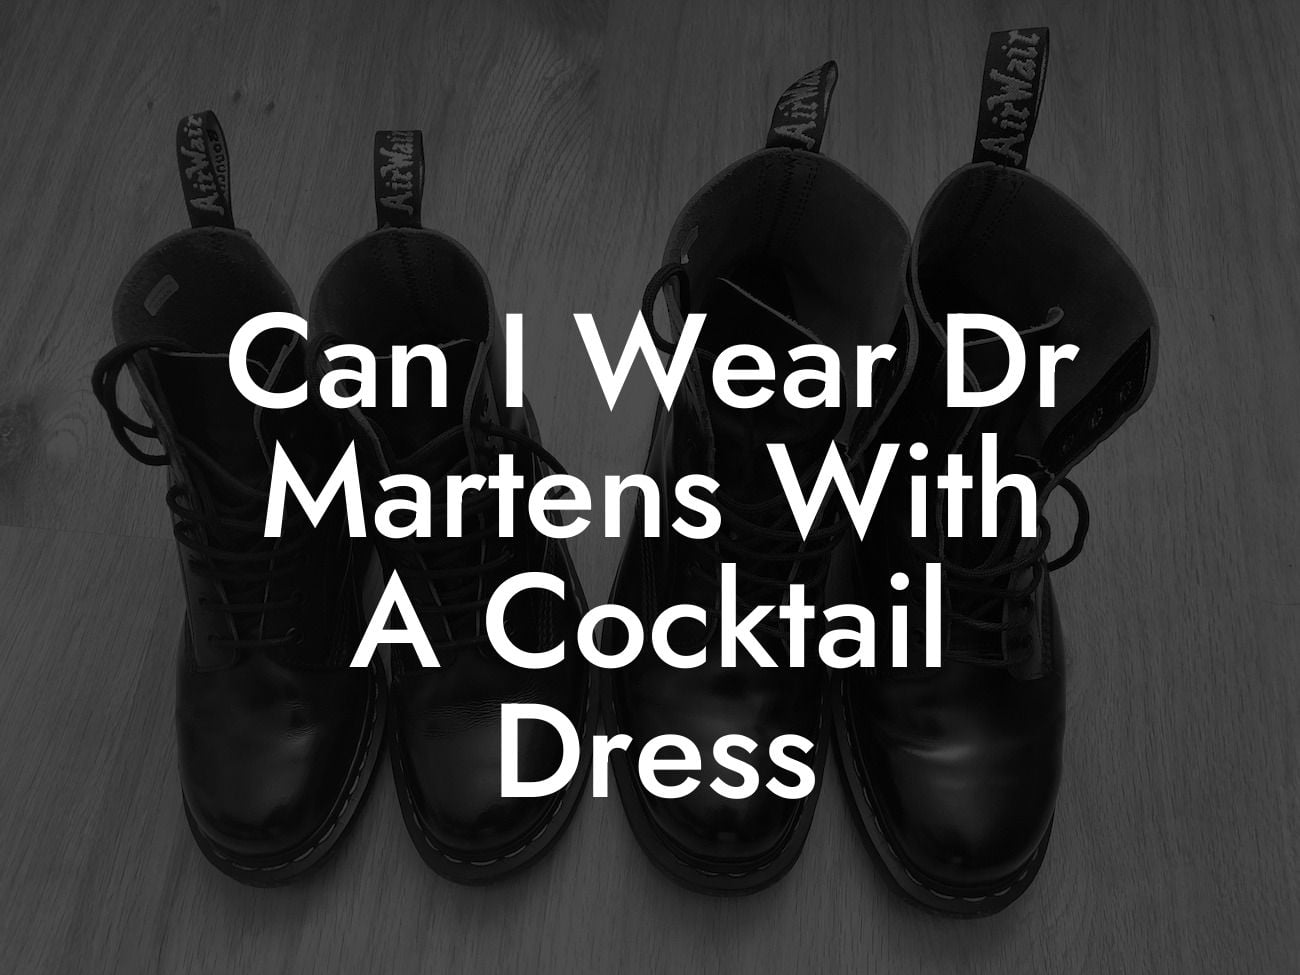 Can I Wear Dr Martens With A Cocktail Dress